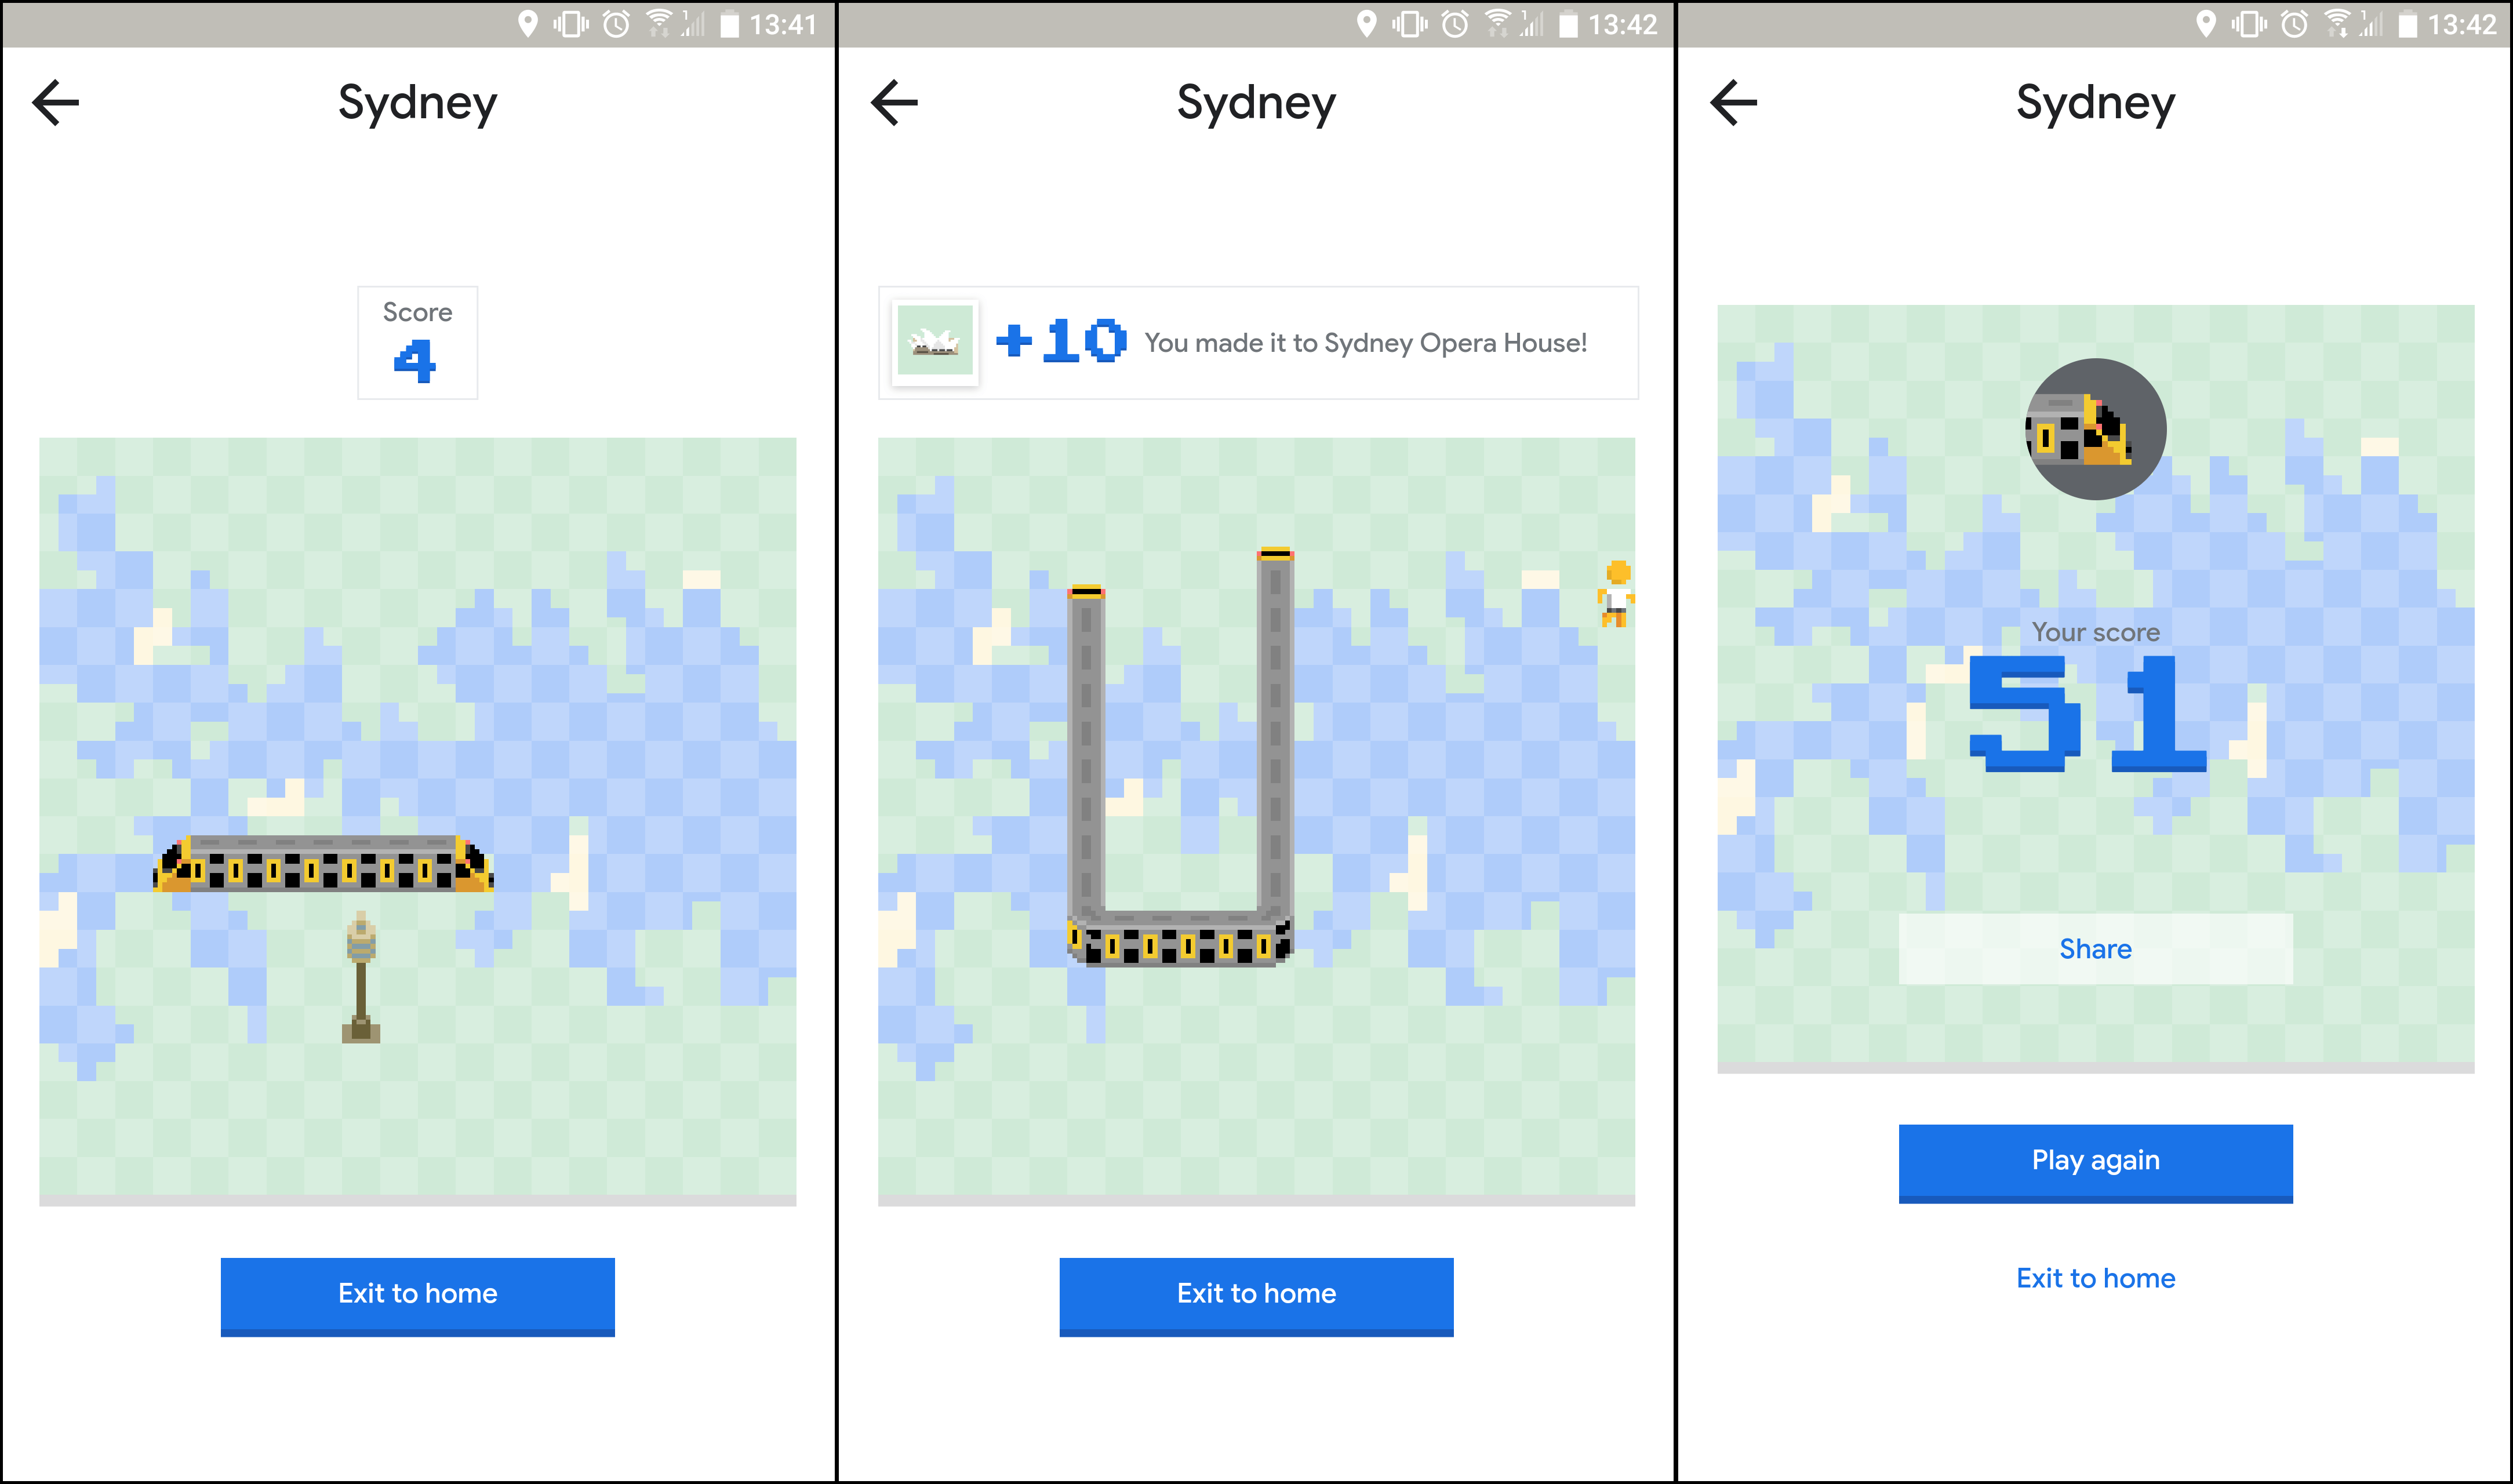 Google Maps Gets The Snake Game For April Fool's Day